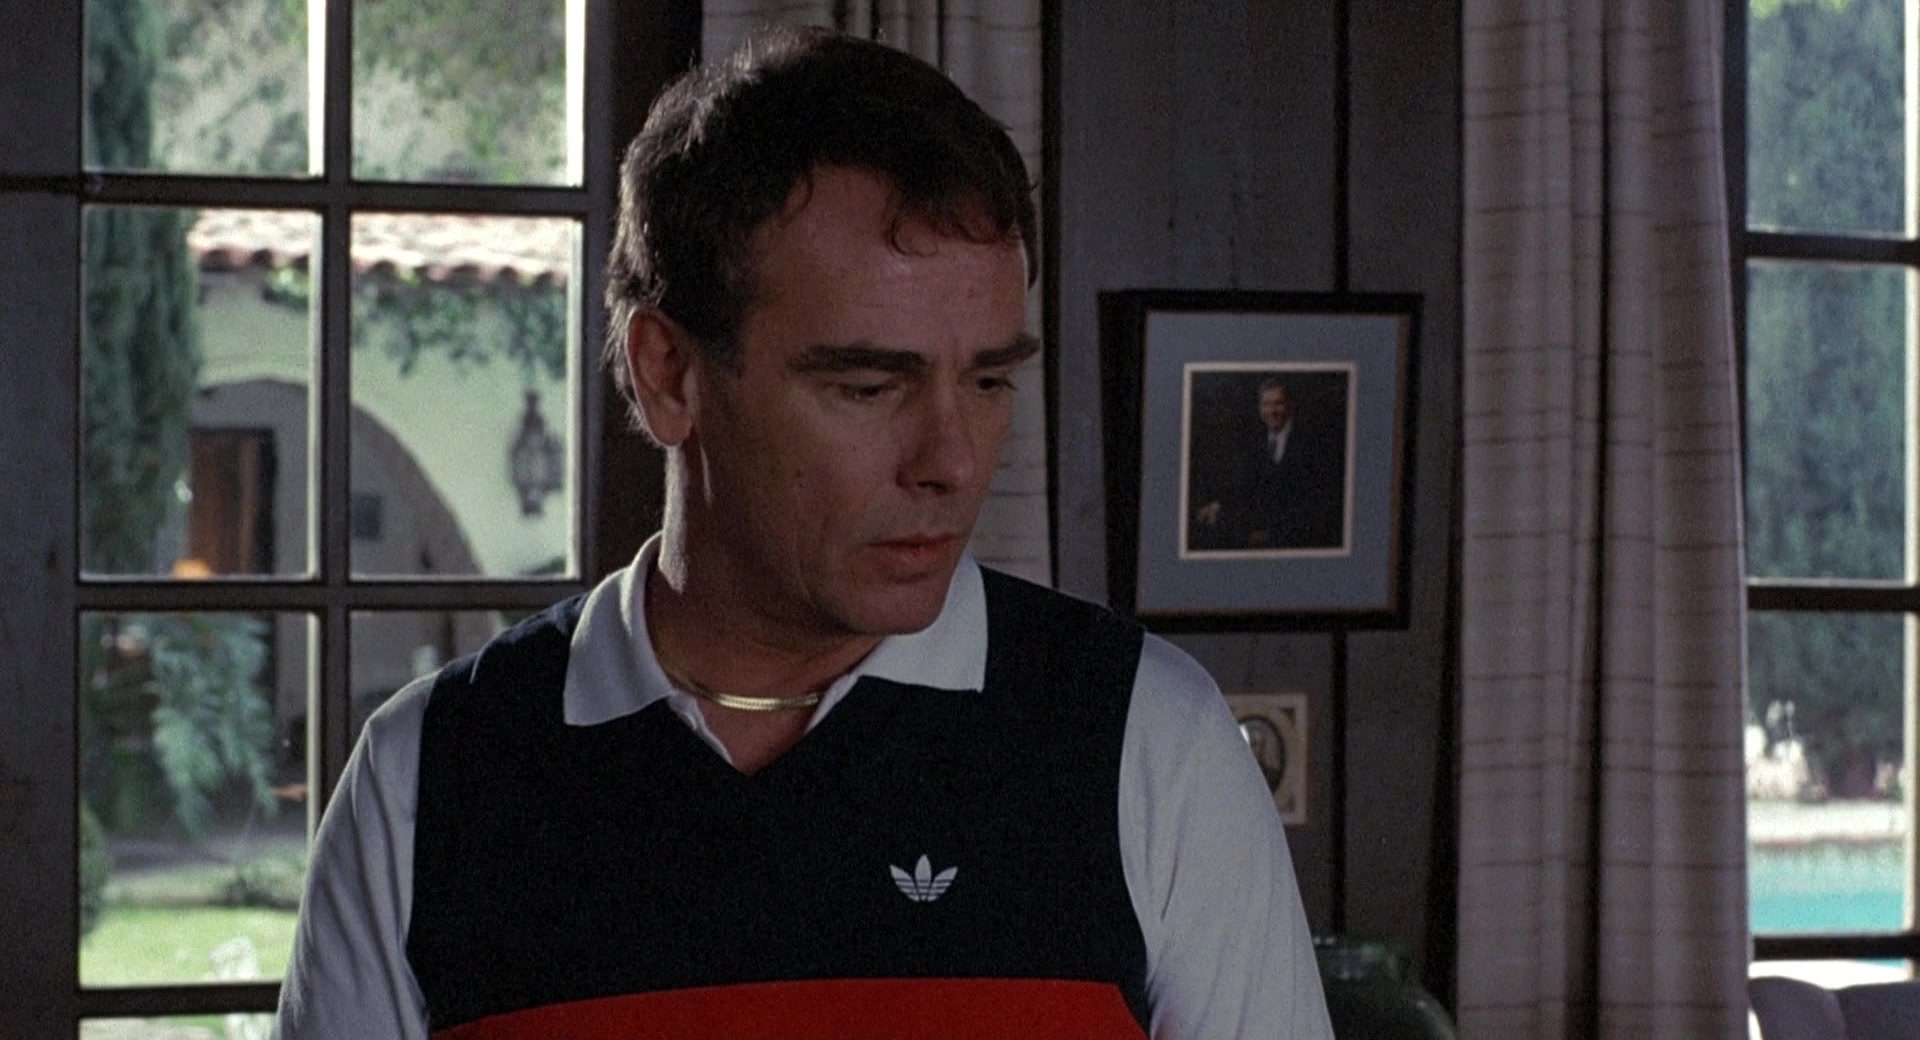 Adidas-Vest-Worn-by-Dean-Stockwell-in-To